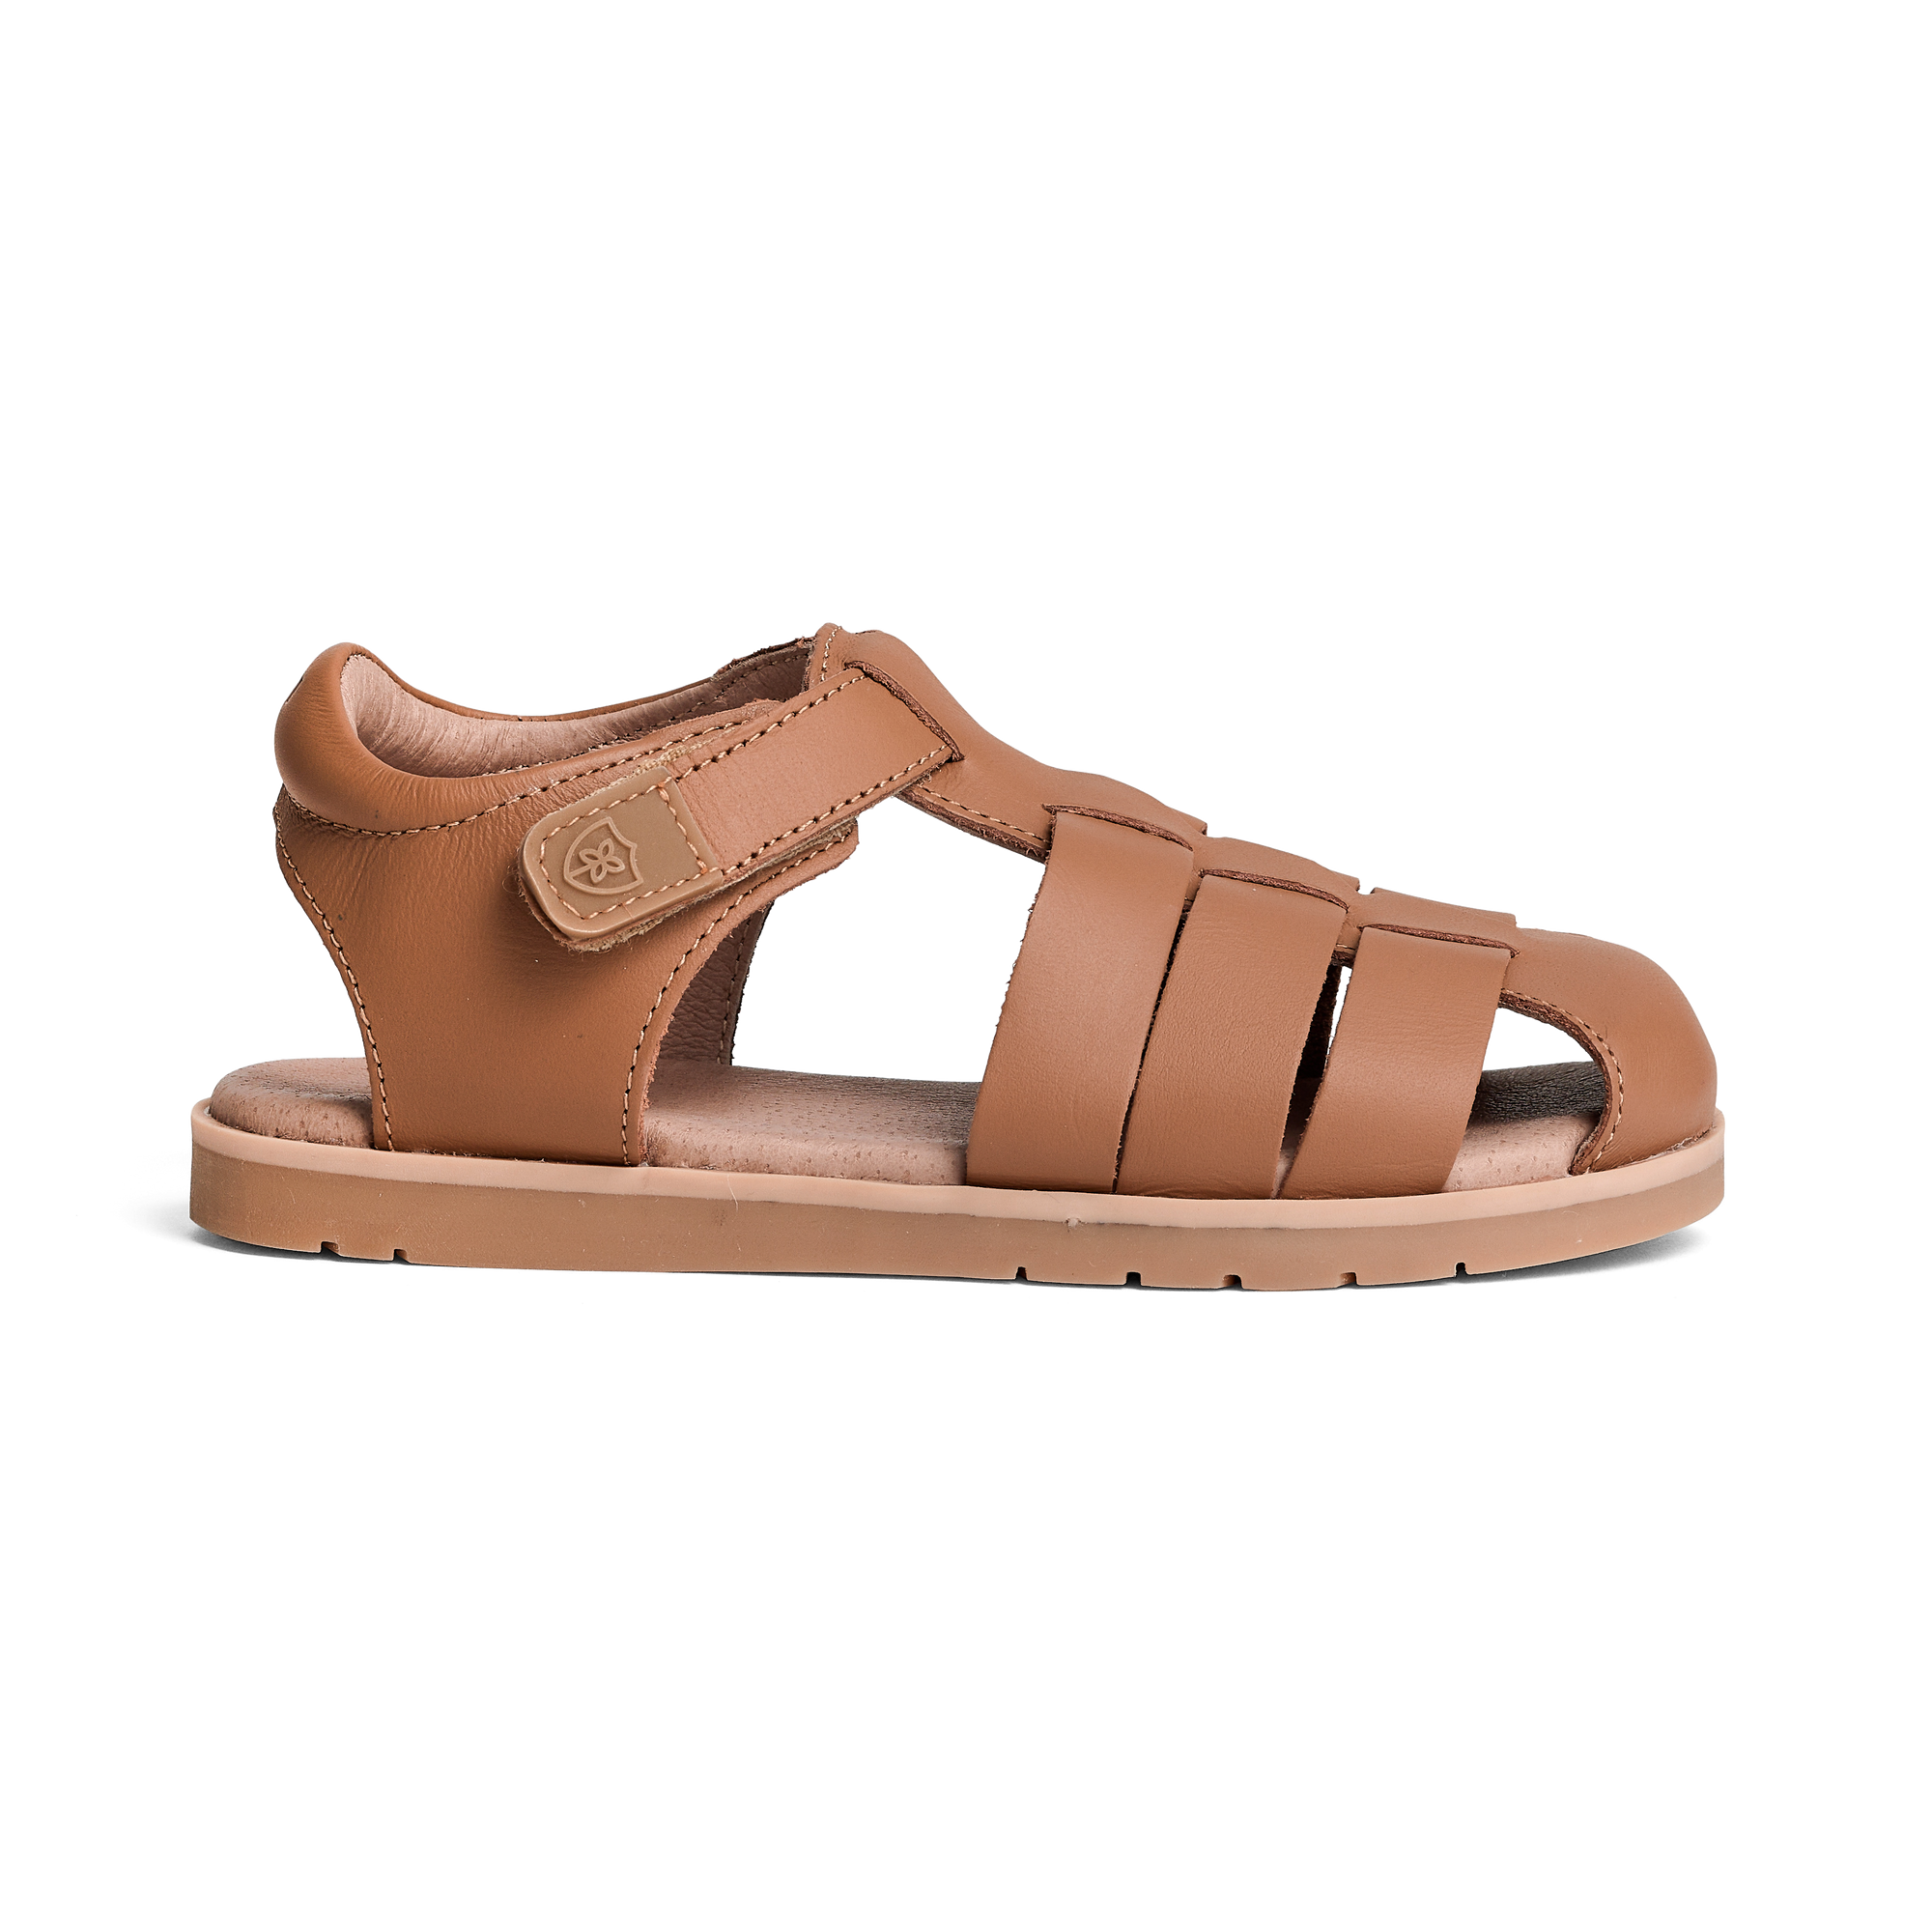 leather kids sandal - angus and dudley